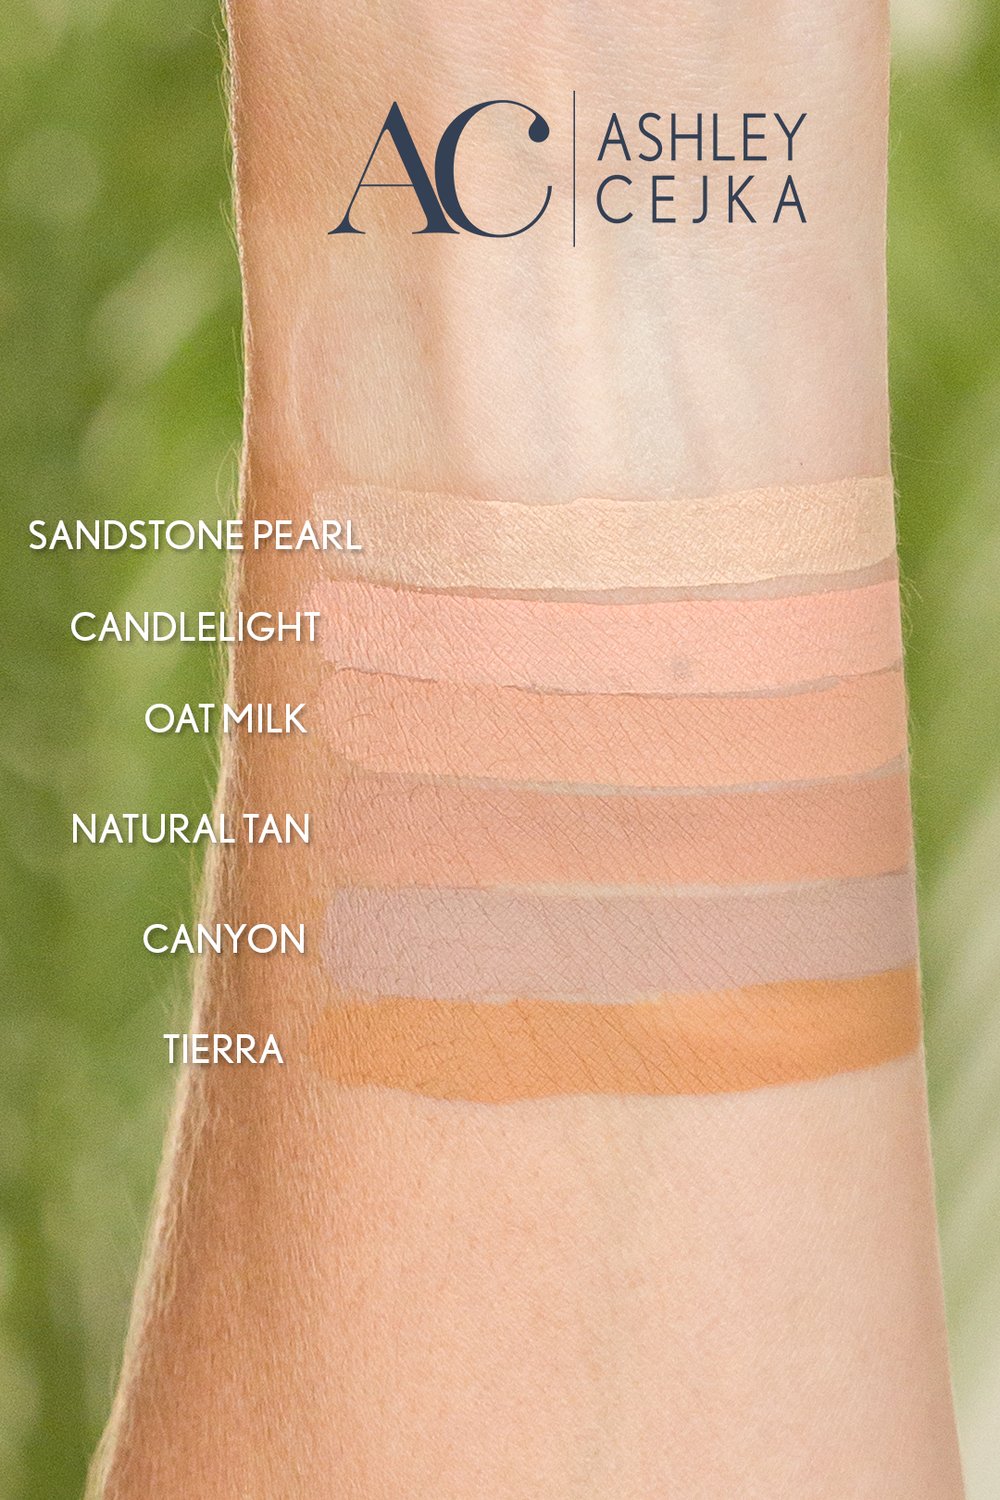  Oat Milk ShadowSense compared to Sandstone Pearl (matte), Candlelight, Natural Tan, Canyon, and Tierra ShadowSense eye shadow colors 